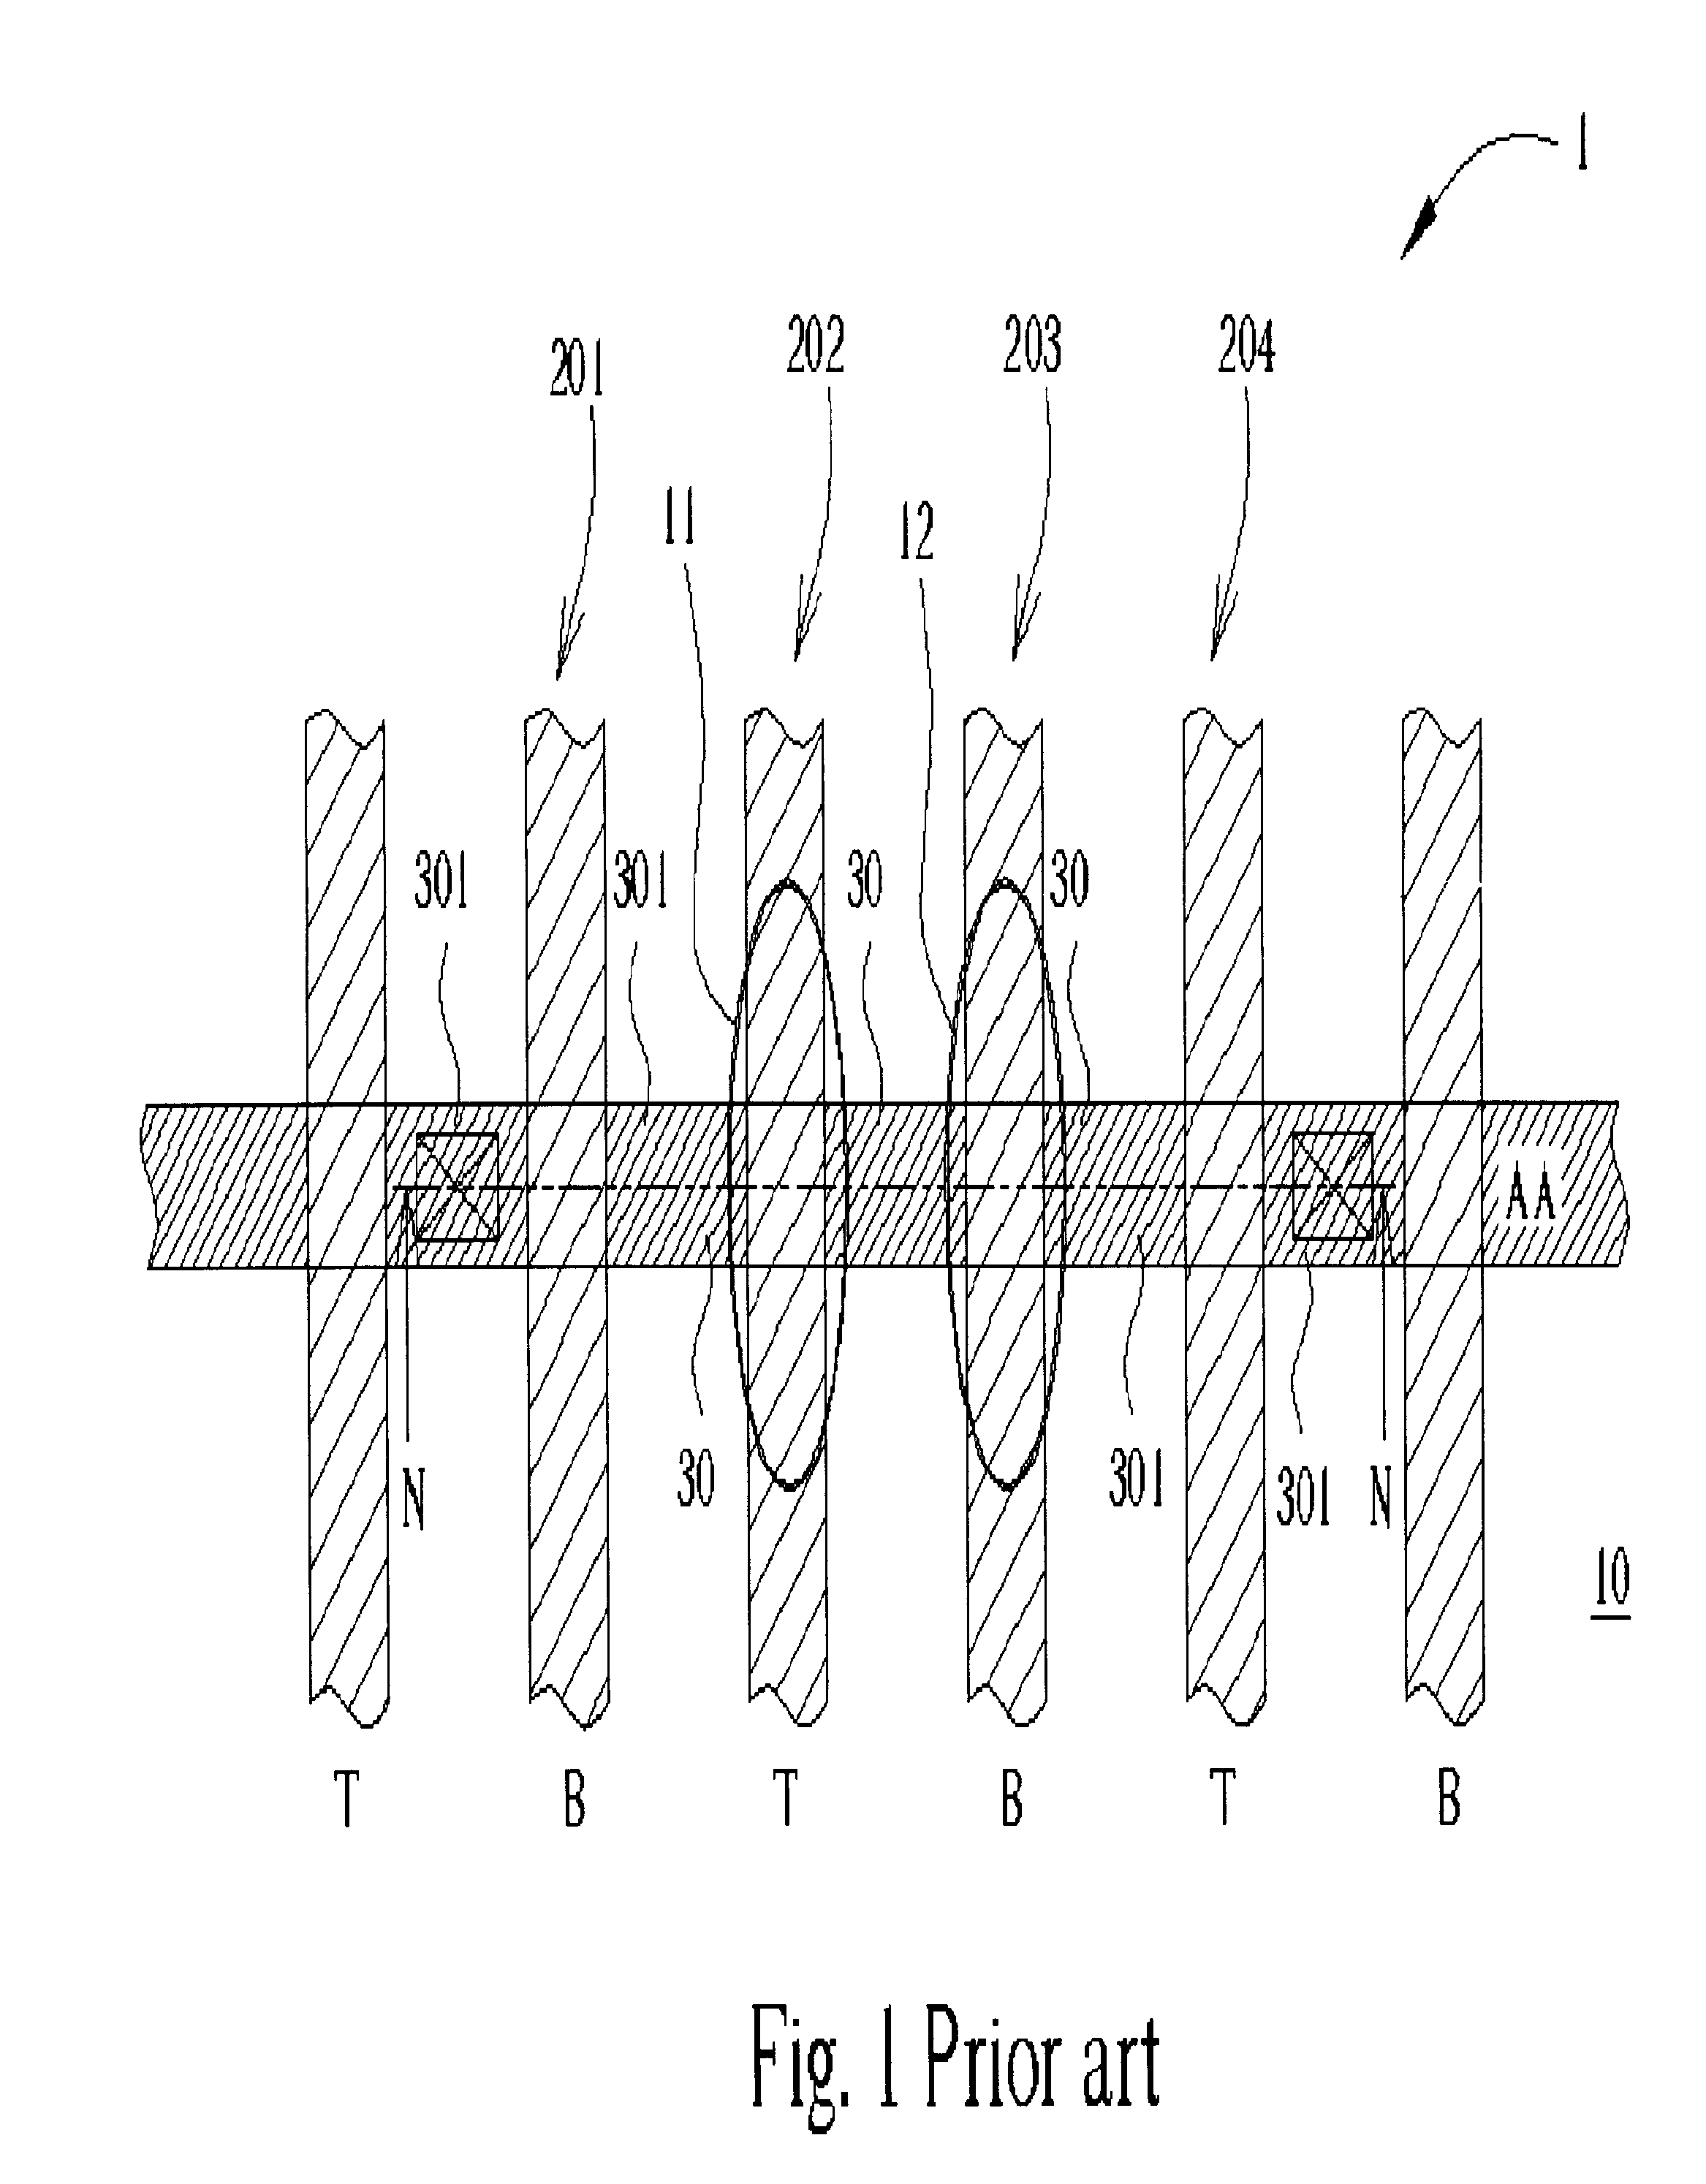 Wafer acceptance testing method and structure of a test key used in the method